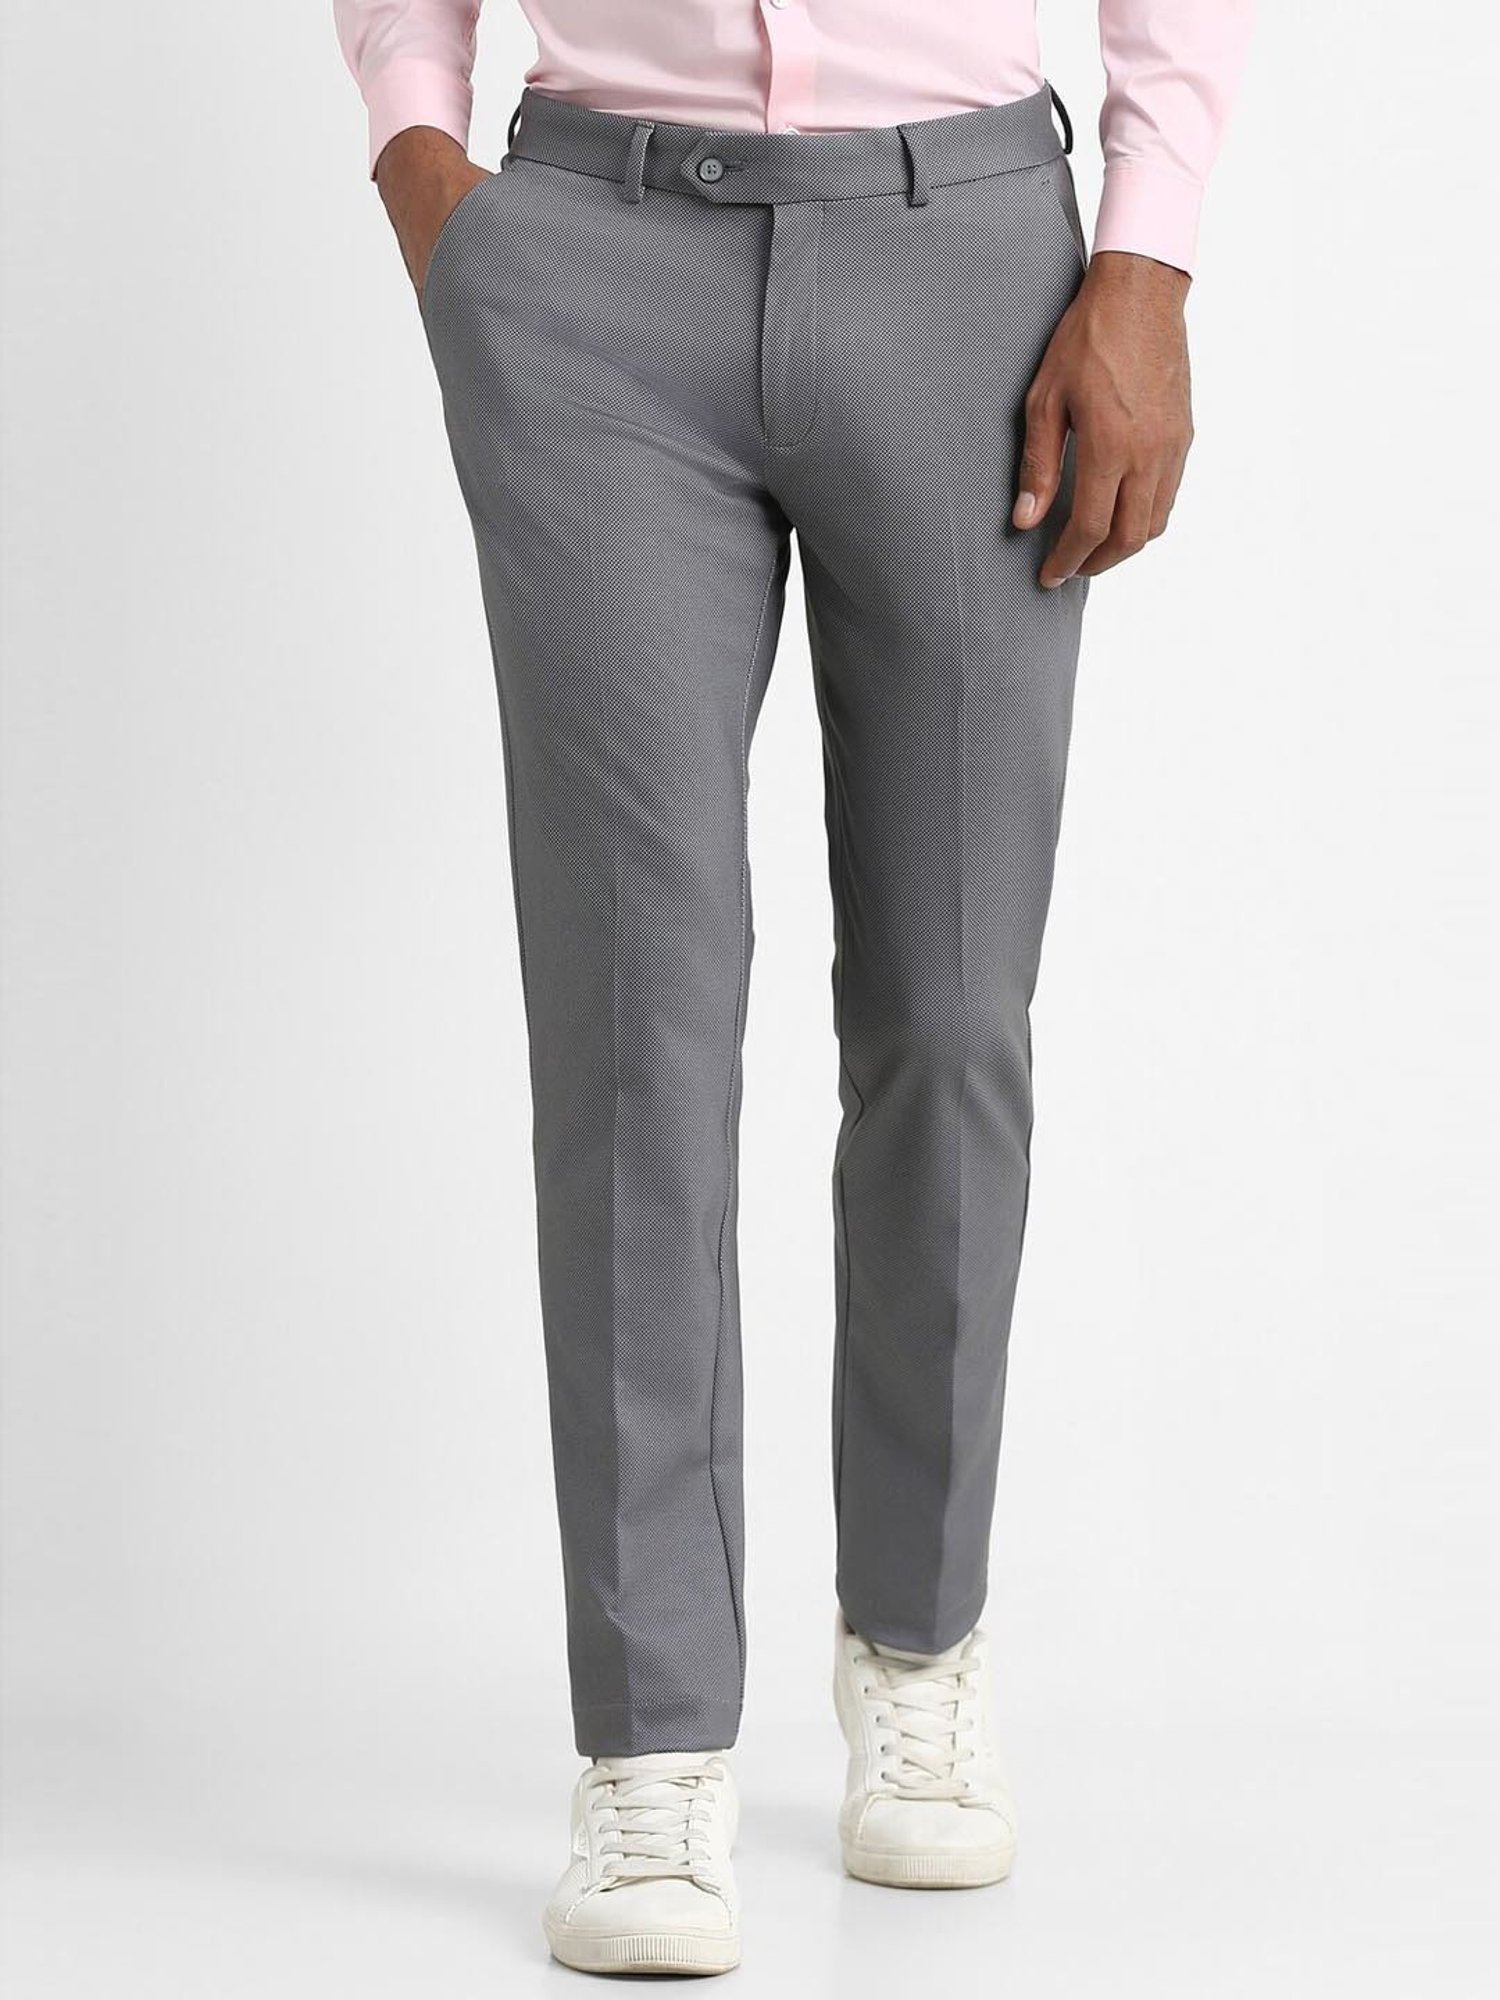 Peter England CHECK CARROT FIT FORMAL TROUSERS | handsandhead